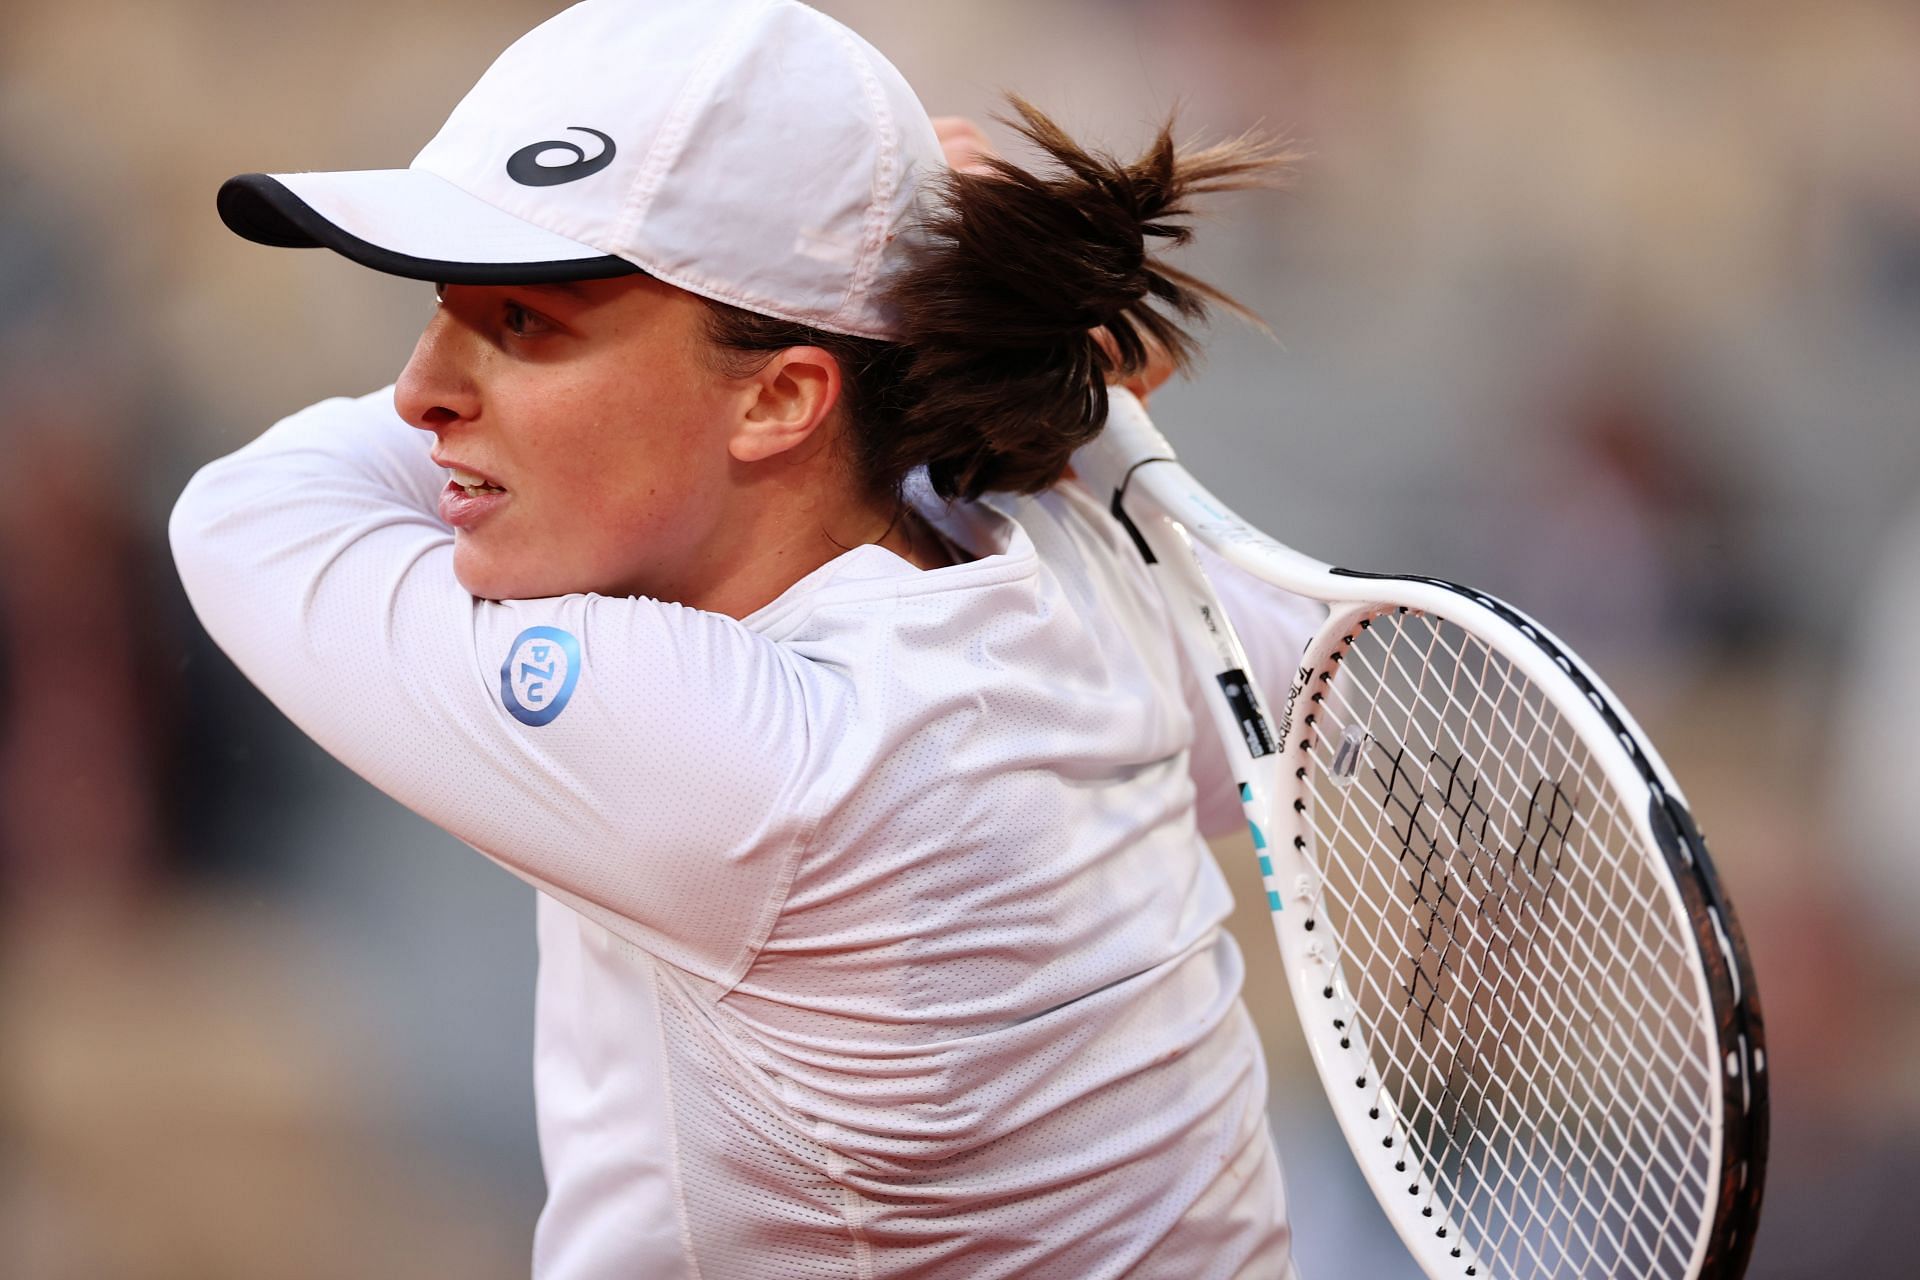 Iga Swiatek faces Jessica Pegula in the quarterfinals of the French Open